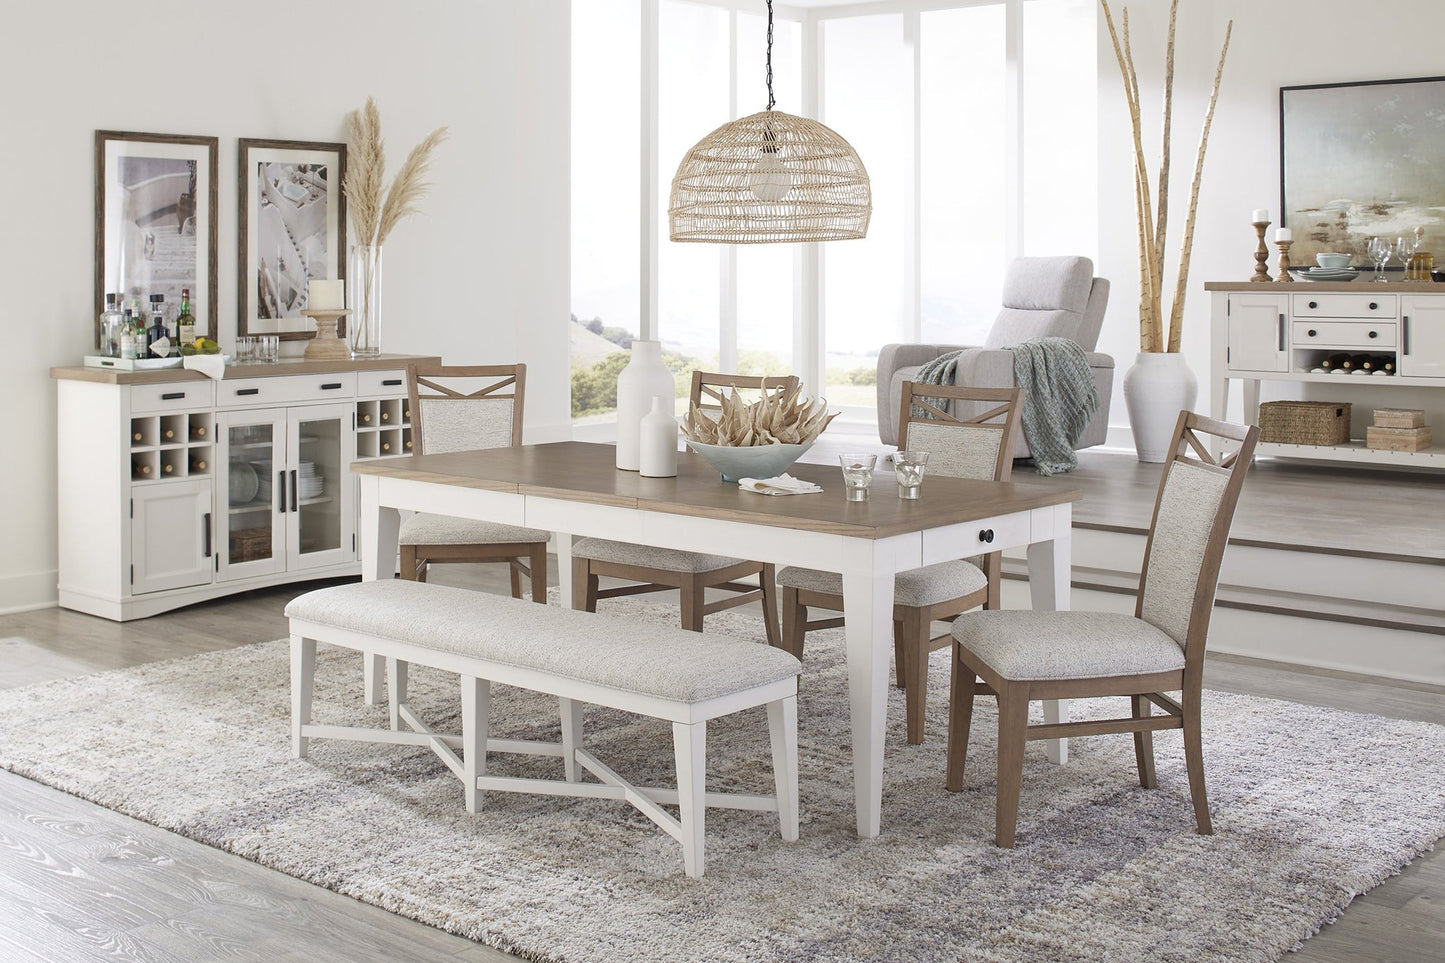 AMERICANA MODERN DINING DINING TABLE 60 IN. X 38 IN. RECT TO 78 IN. (18 IN. LEAF)